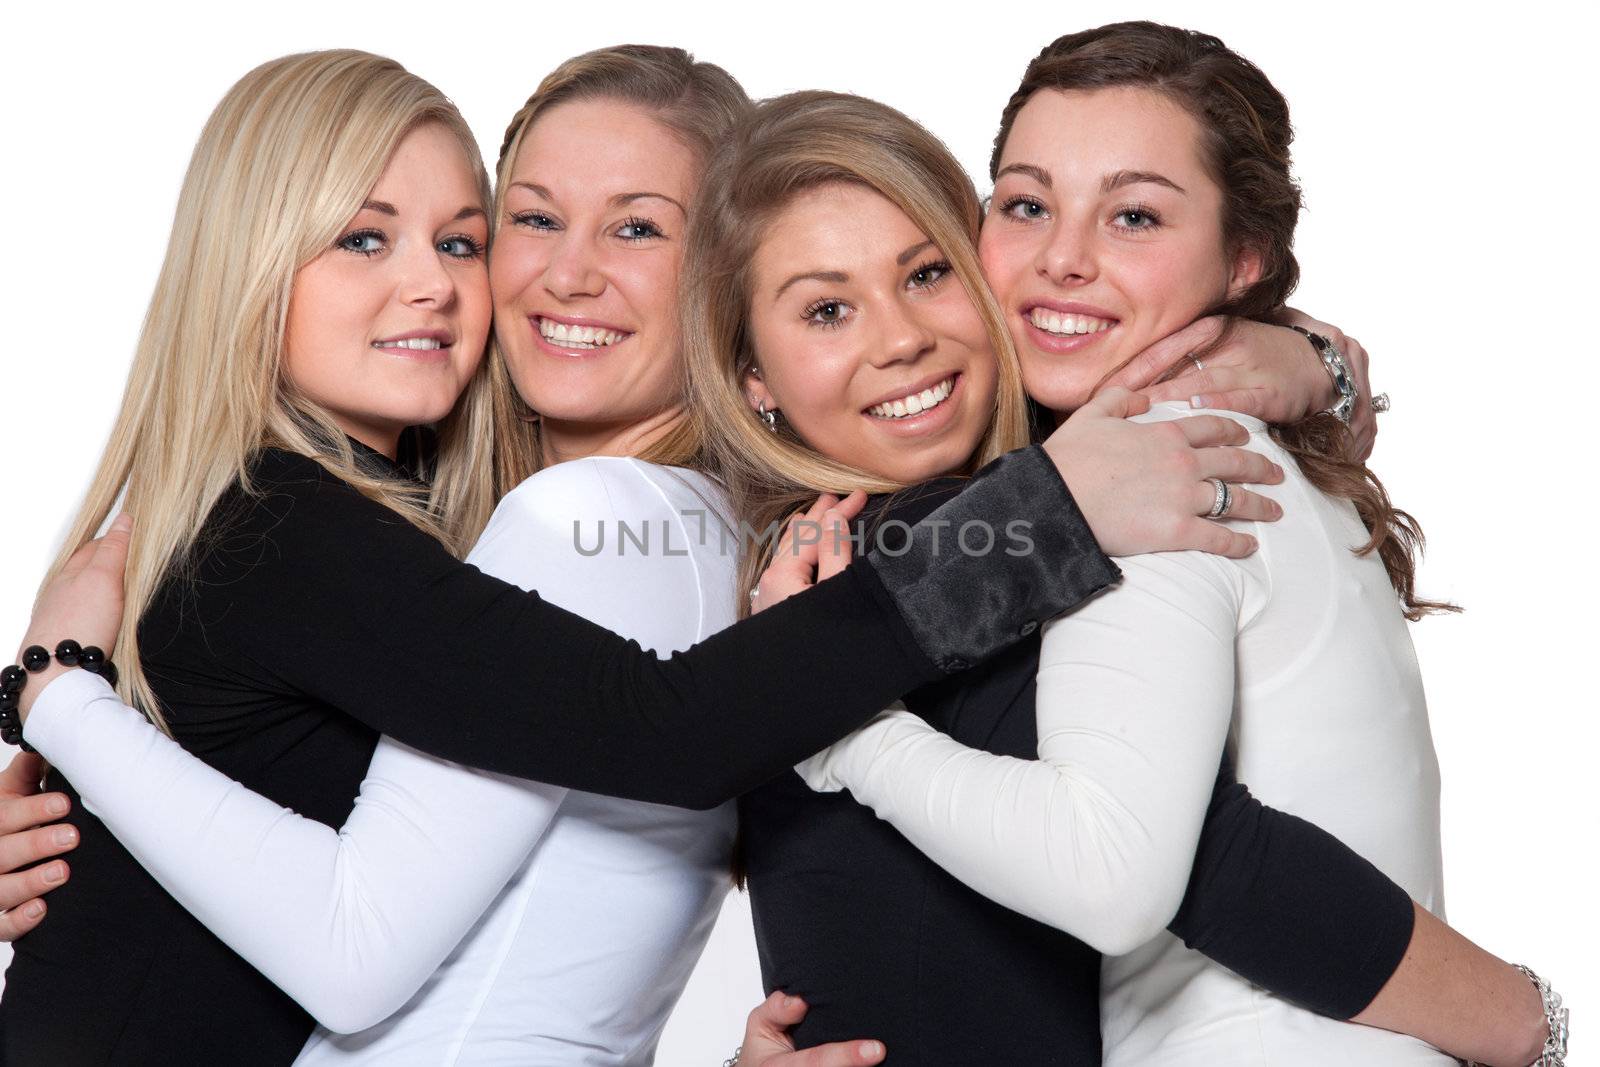 Group of young girlfriends having a happy time together